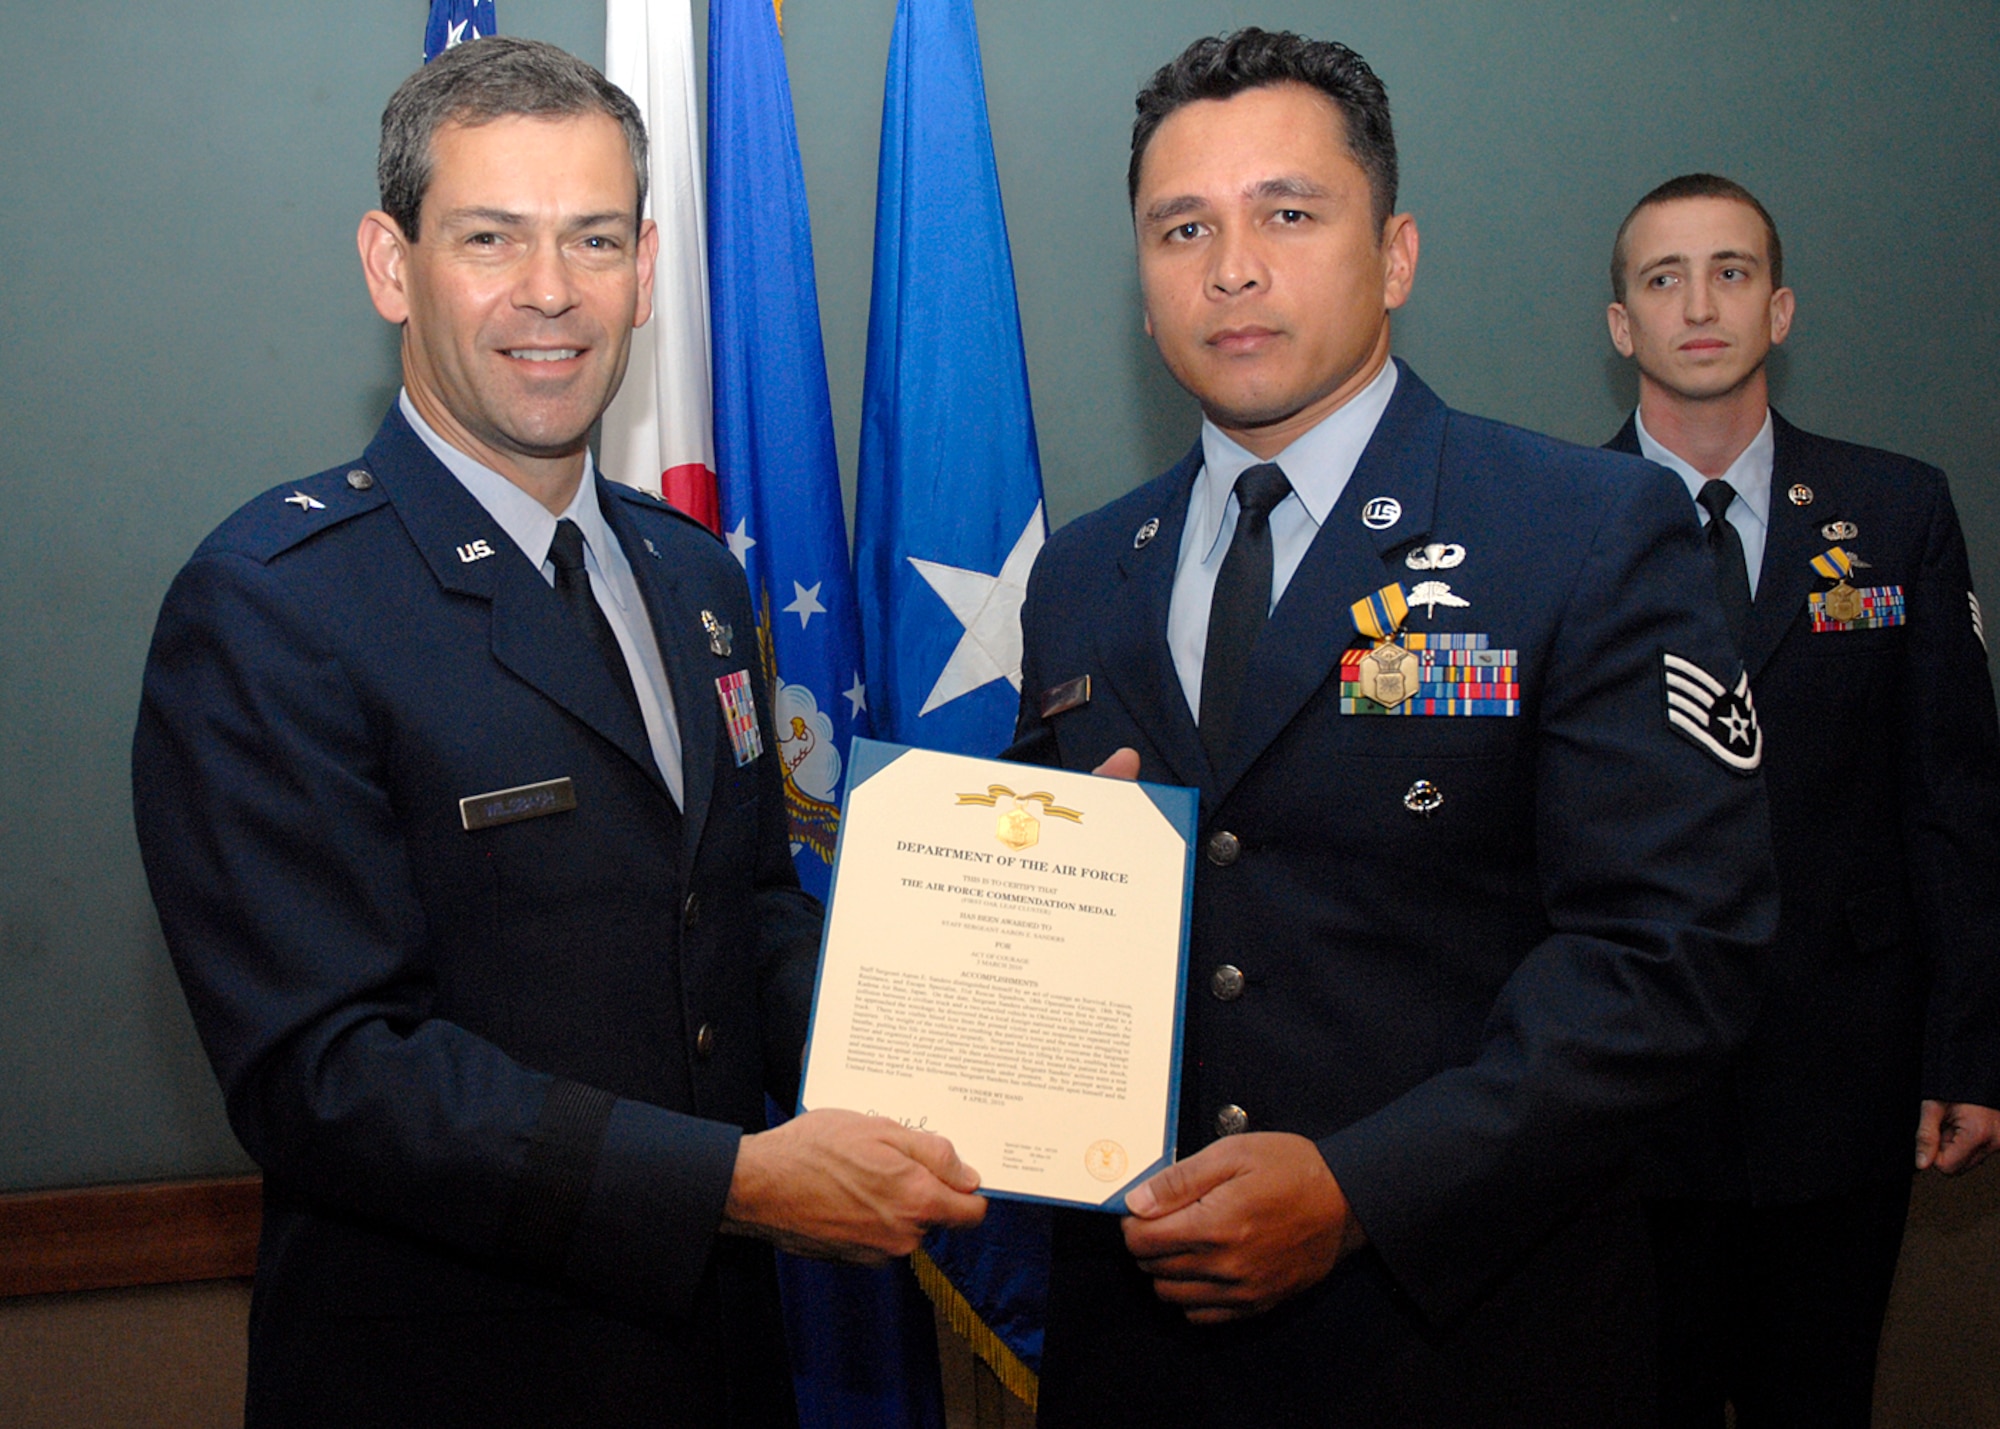 Staff Sgt. Abraham Forehand  stands next to Brig. Gen. Ken Wilsbach, 18th Wing commander, after receiving the Air Force Commendation Medal for an act of courage April 26. Sergeant Sanders and Staff Sgt. Aaron Sanders, from the 353rd Special Operations Group, both received medals for pulling a man pinned under an automobile after an off-base accident March 3. (U.S. Air Force photo / Airman 1st Class Jarvie Wallace)